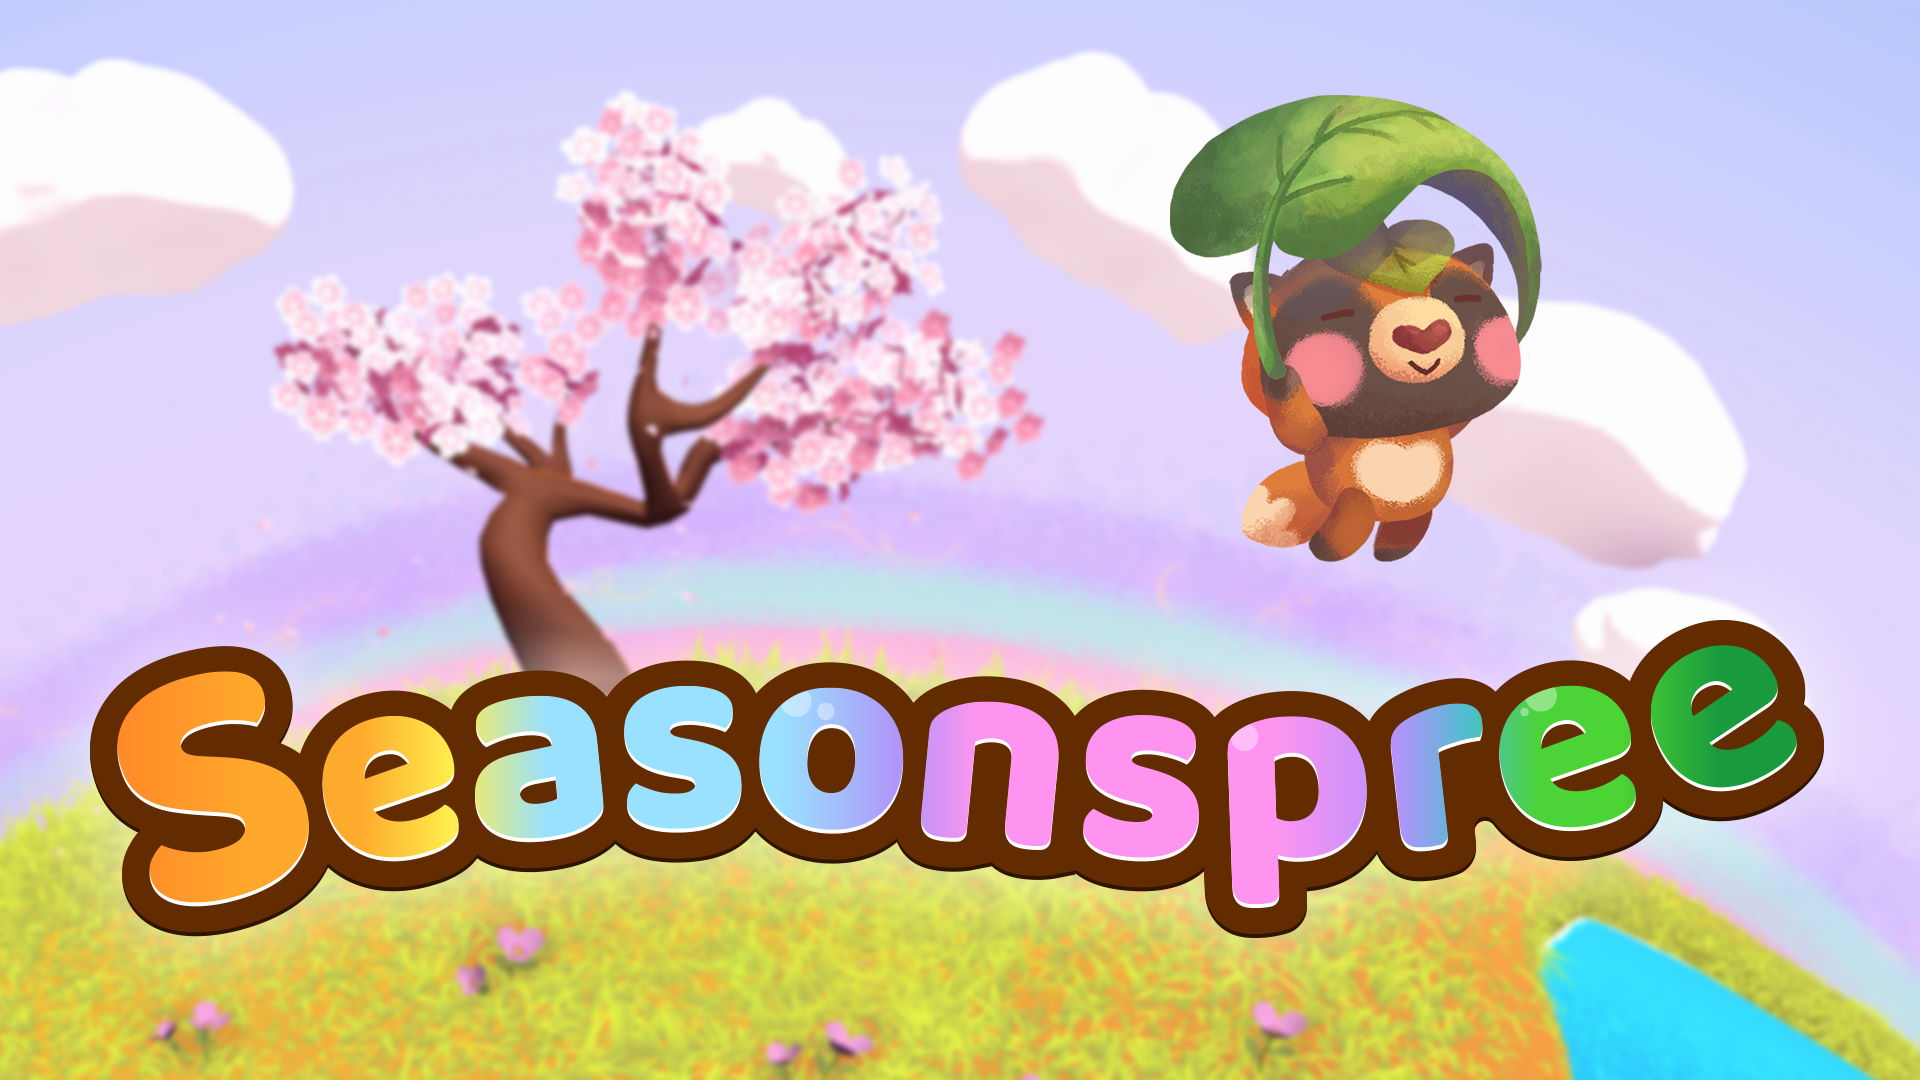 a vibrant title card for Seasonspree, a stylized tanuki character uses a large green leaf as a glider in a colourful world with purple sky, clouds, a cherry tree, pond and meadow below